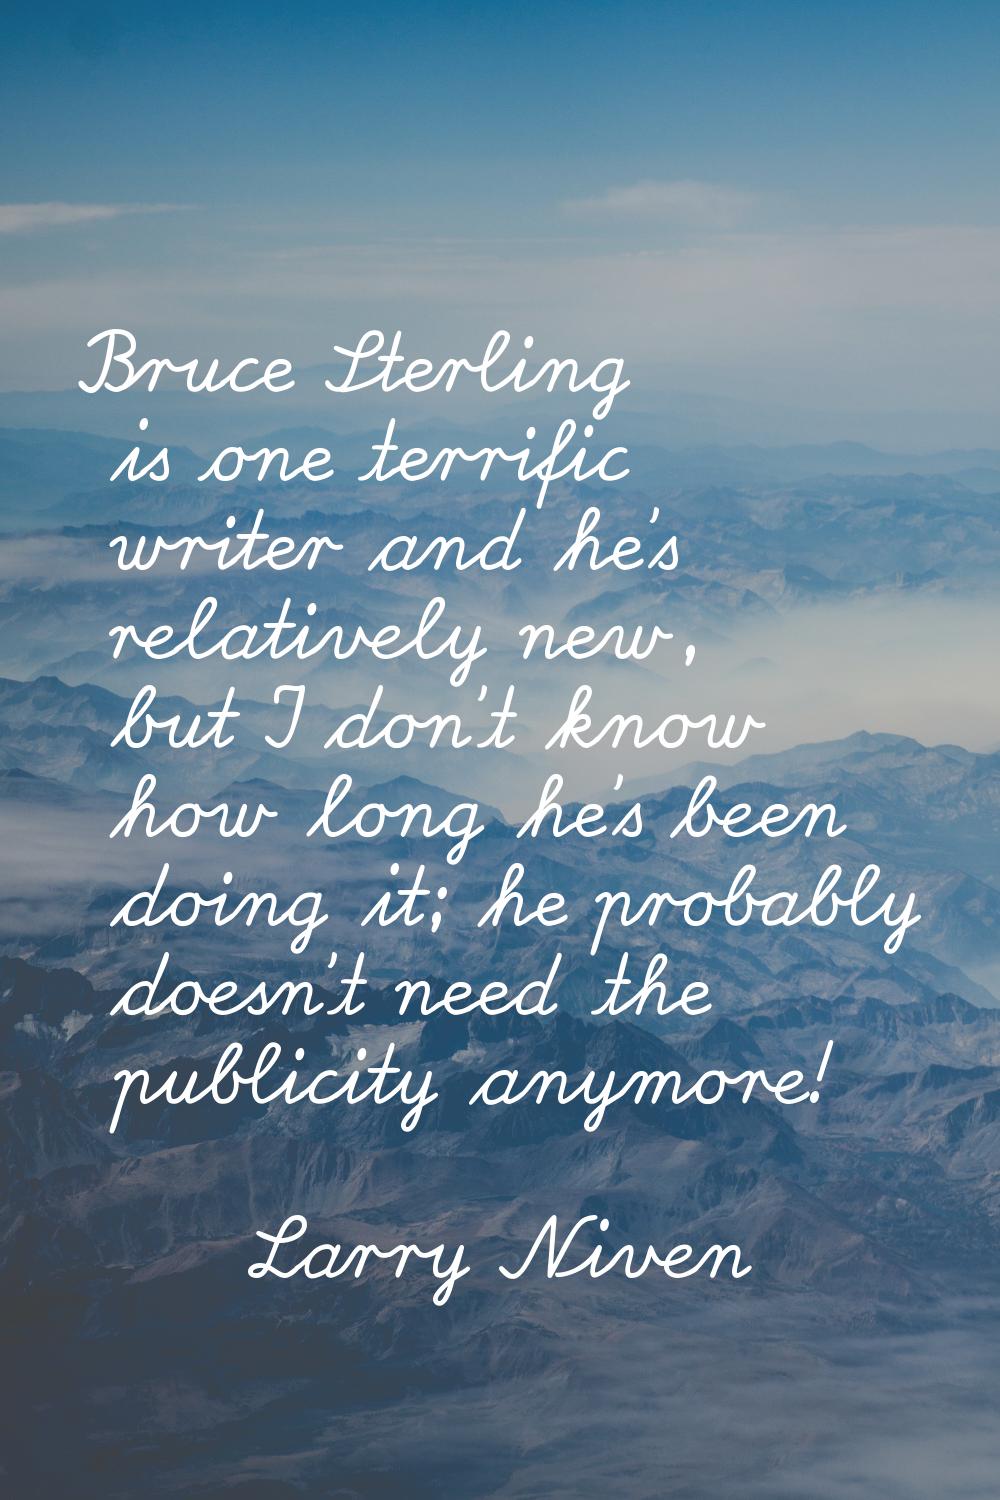 Bruce Sterling is one terrific writer and he's relatively new, but I don't know how long he's been 